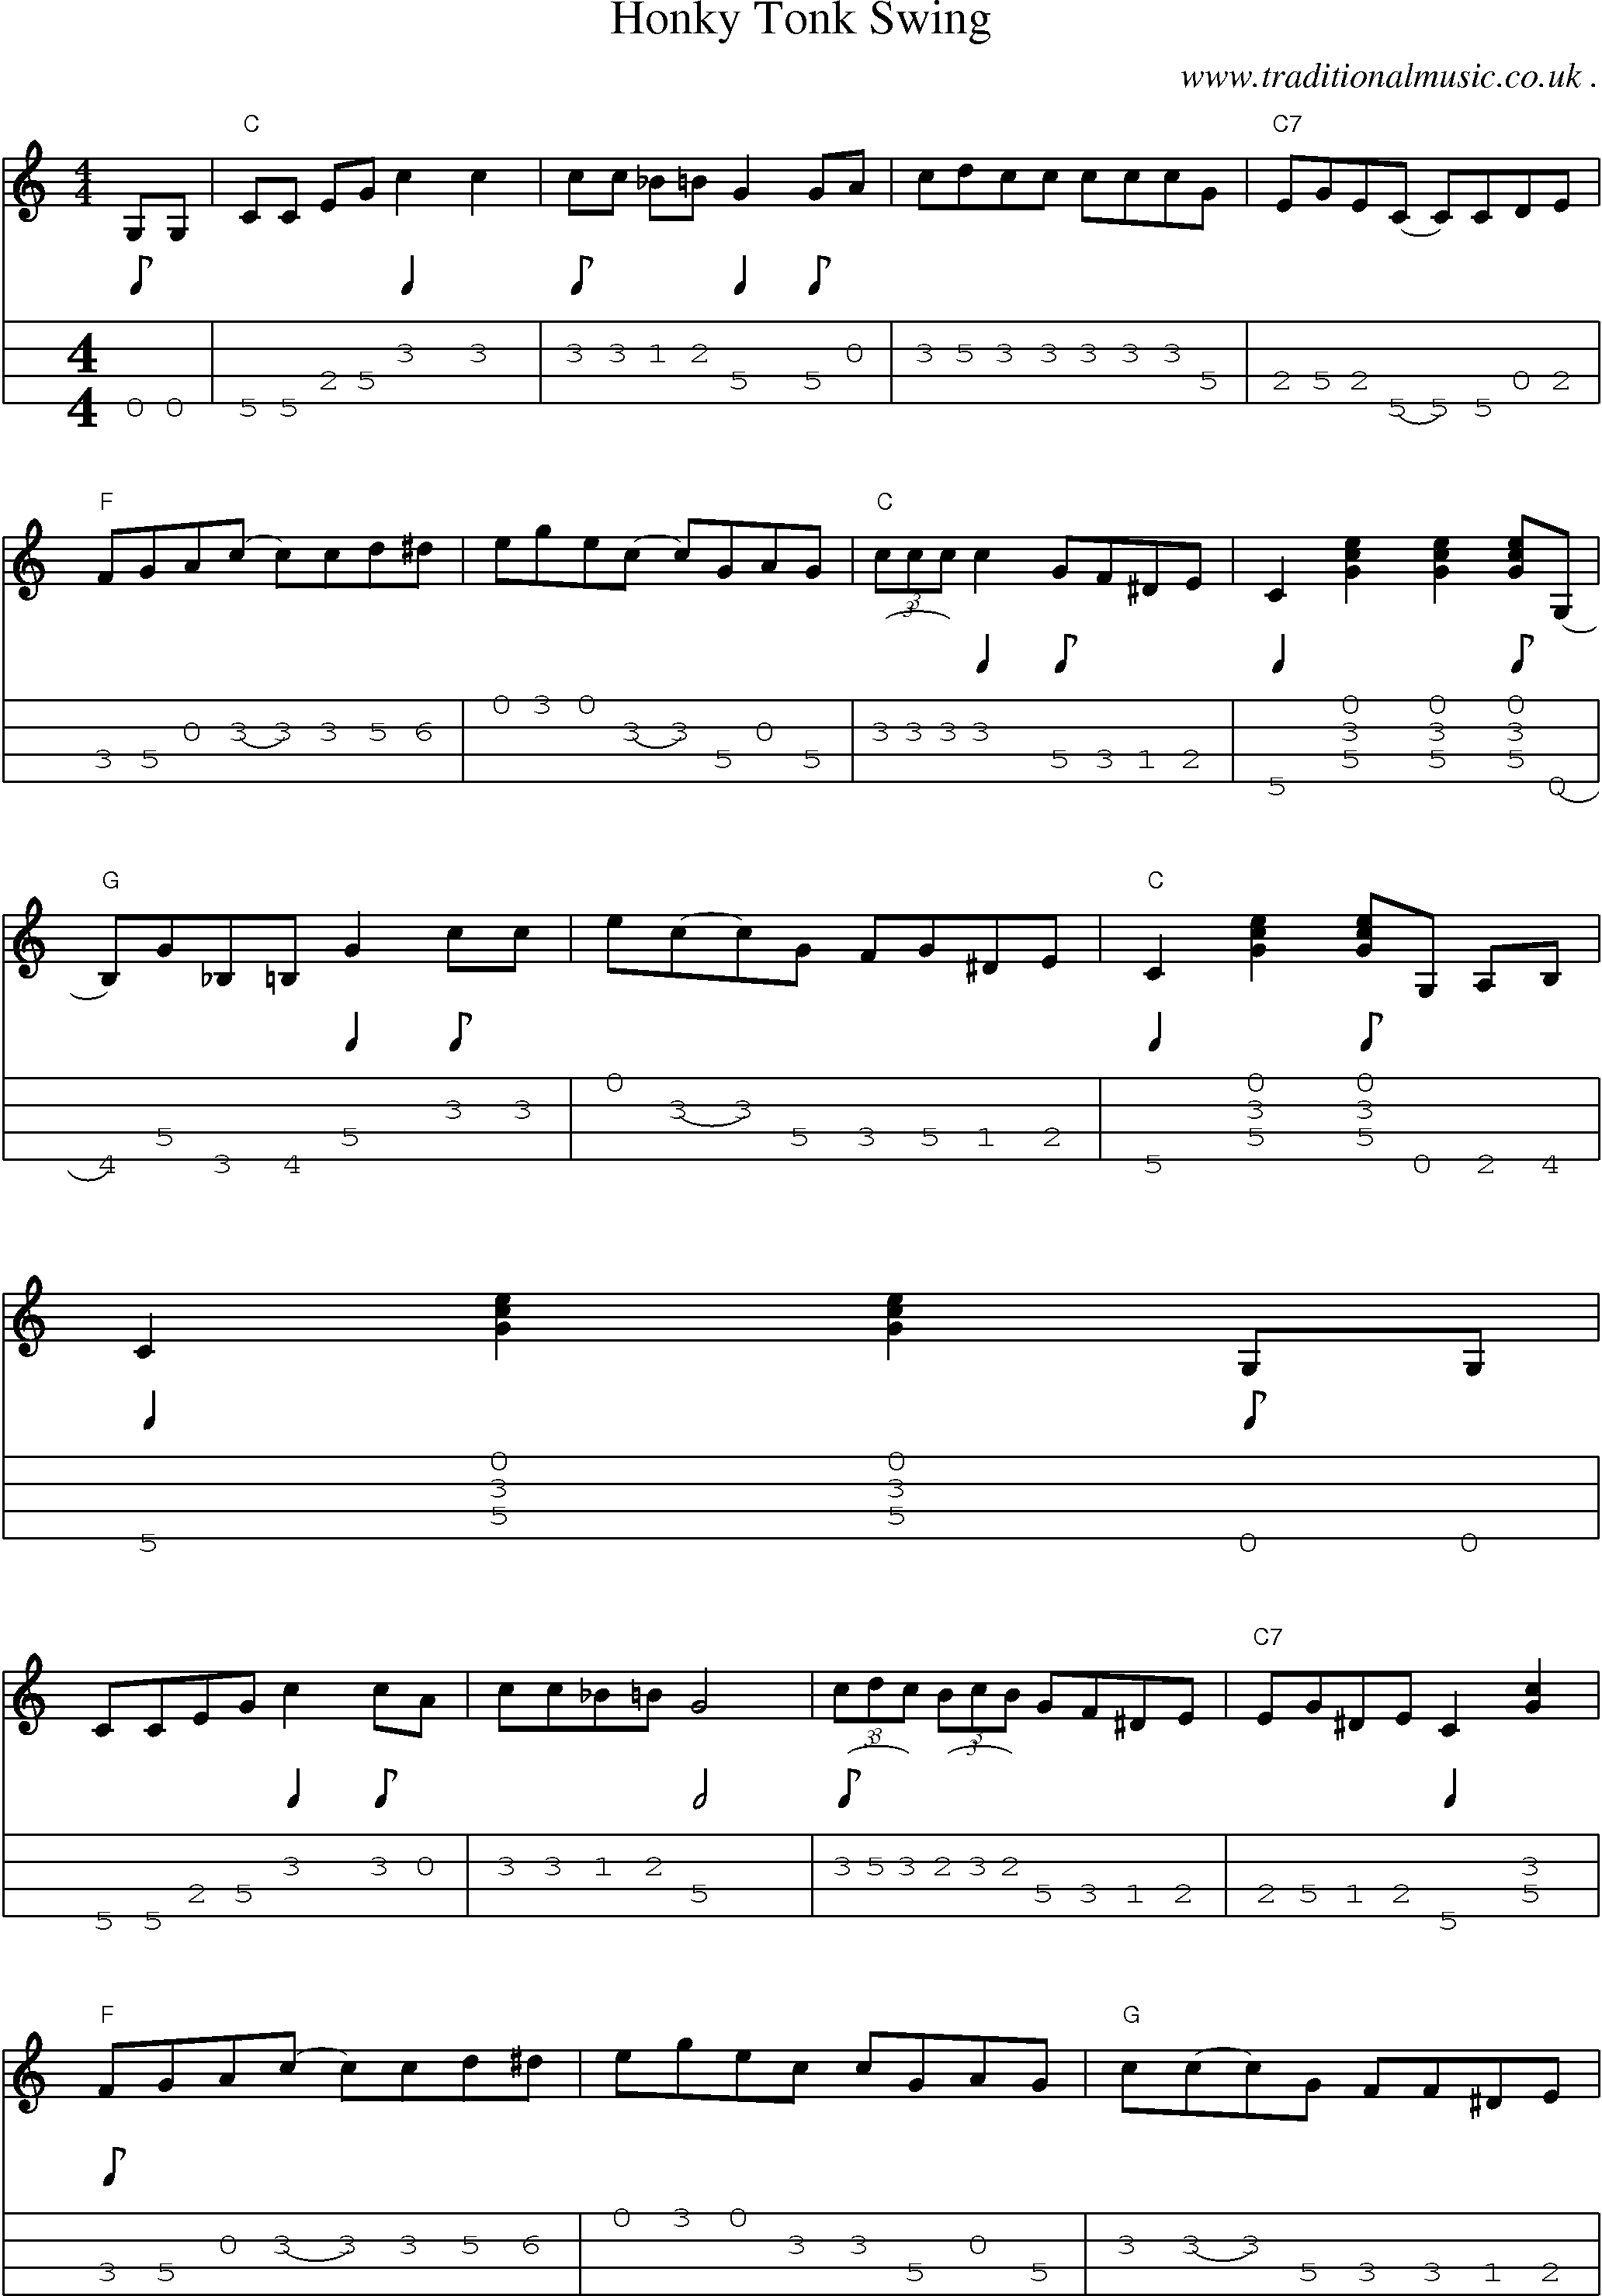 Music Score and Mandolin Tabs for Honky Tonk Swing